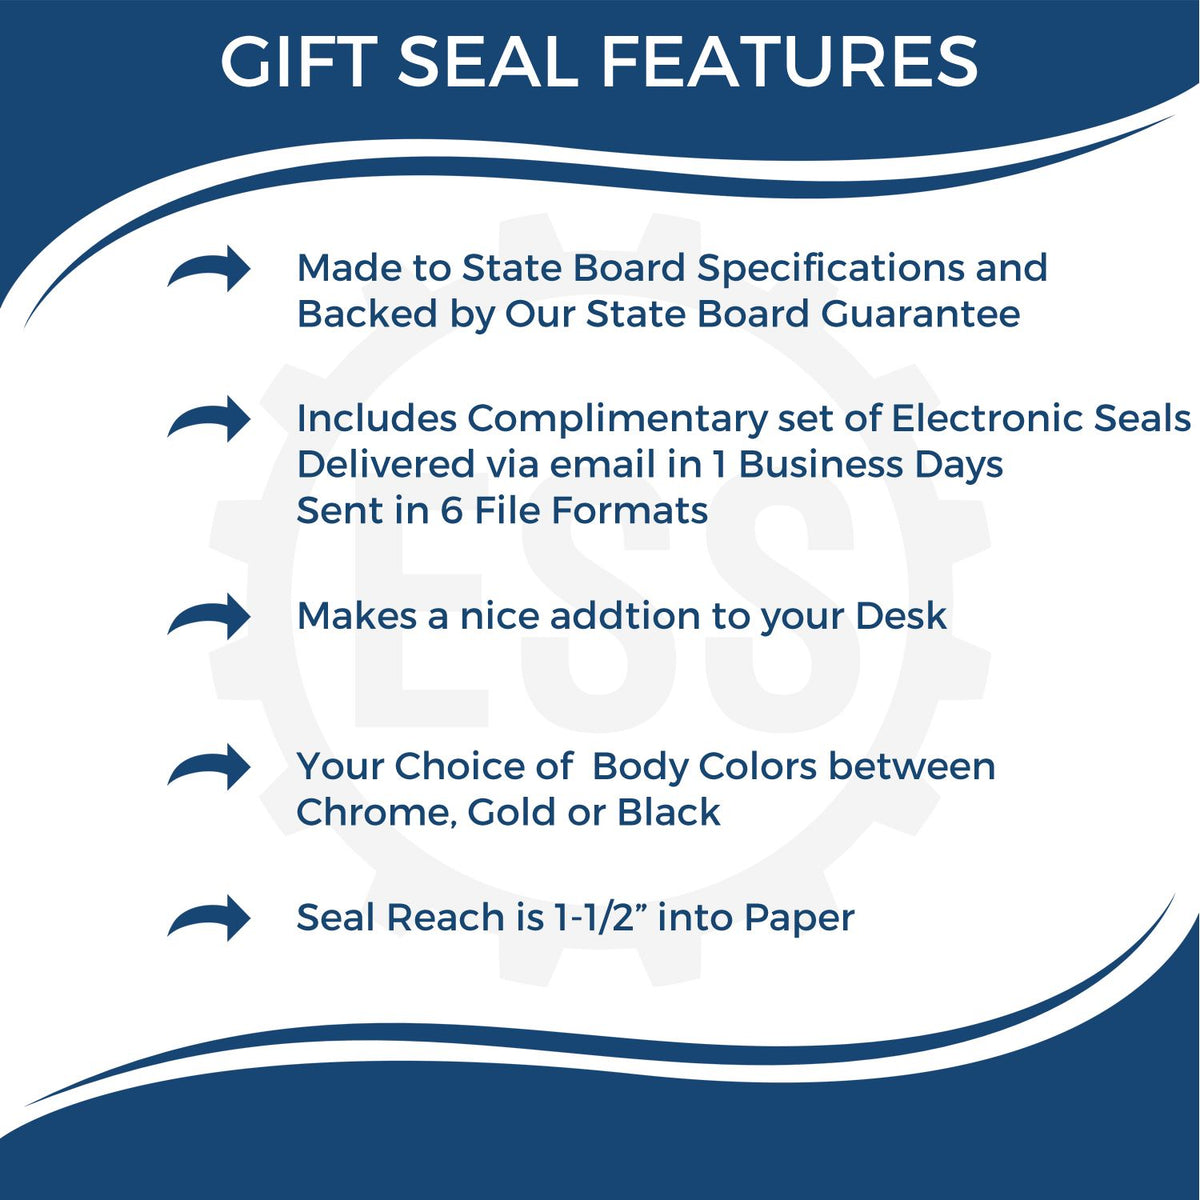 A picture of an infographic highlighting the selling points for the Gift Nevada Geologist Seal